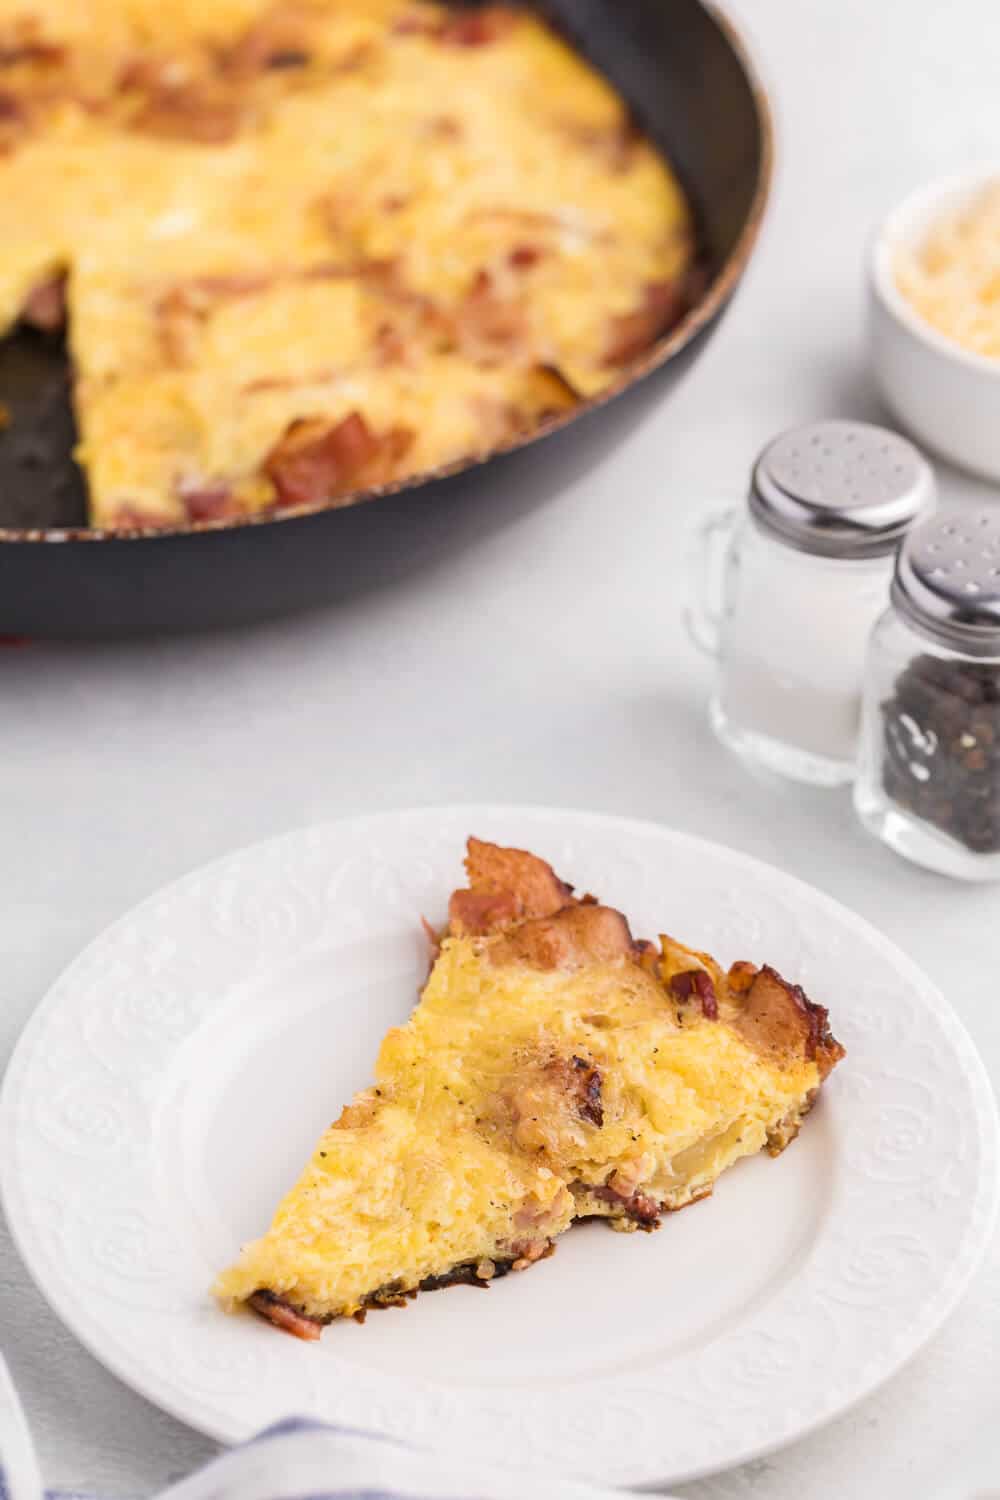 Pancetta & Onion Frittata - With sweet caramelized onions and salty pancetta, this quick and easy frittata is a great low-carb option - anytime of day!